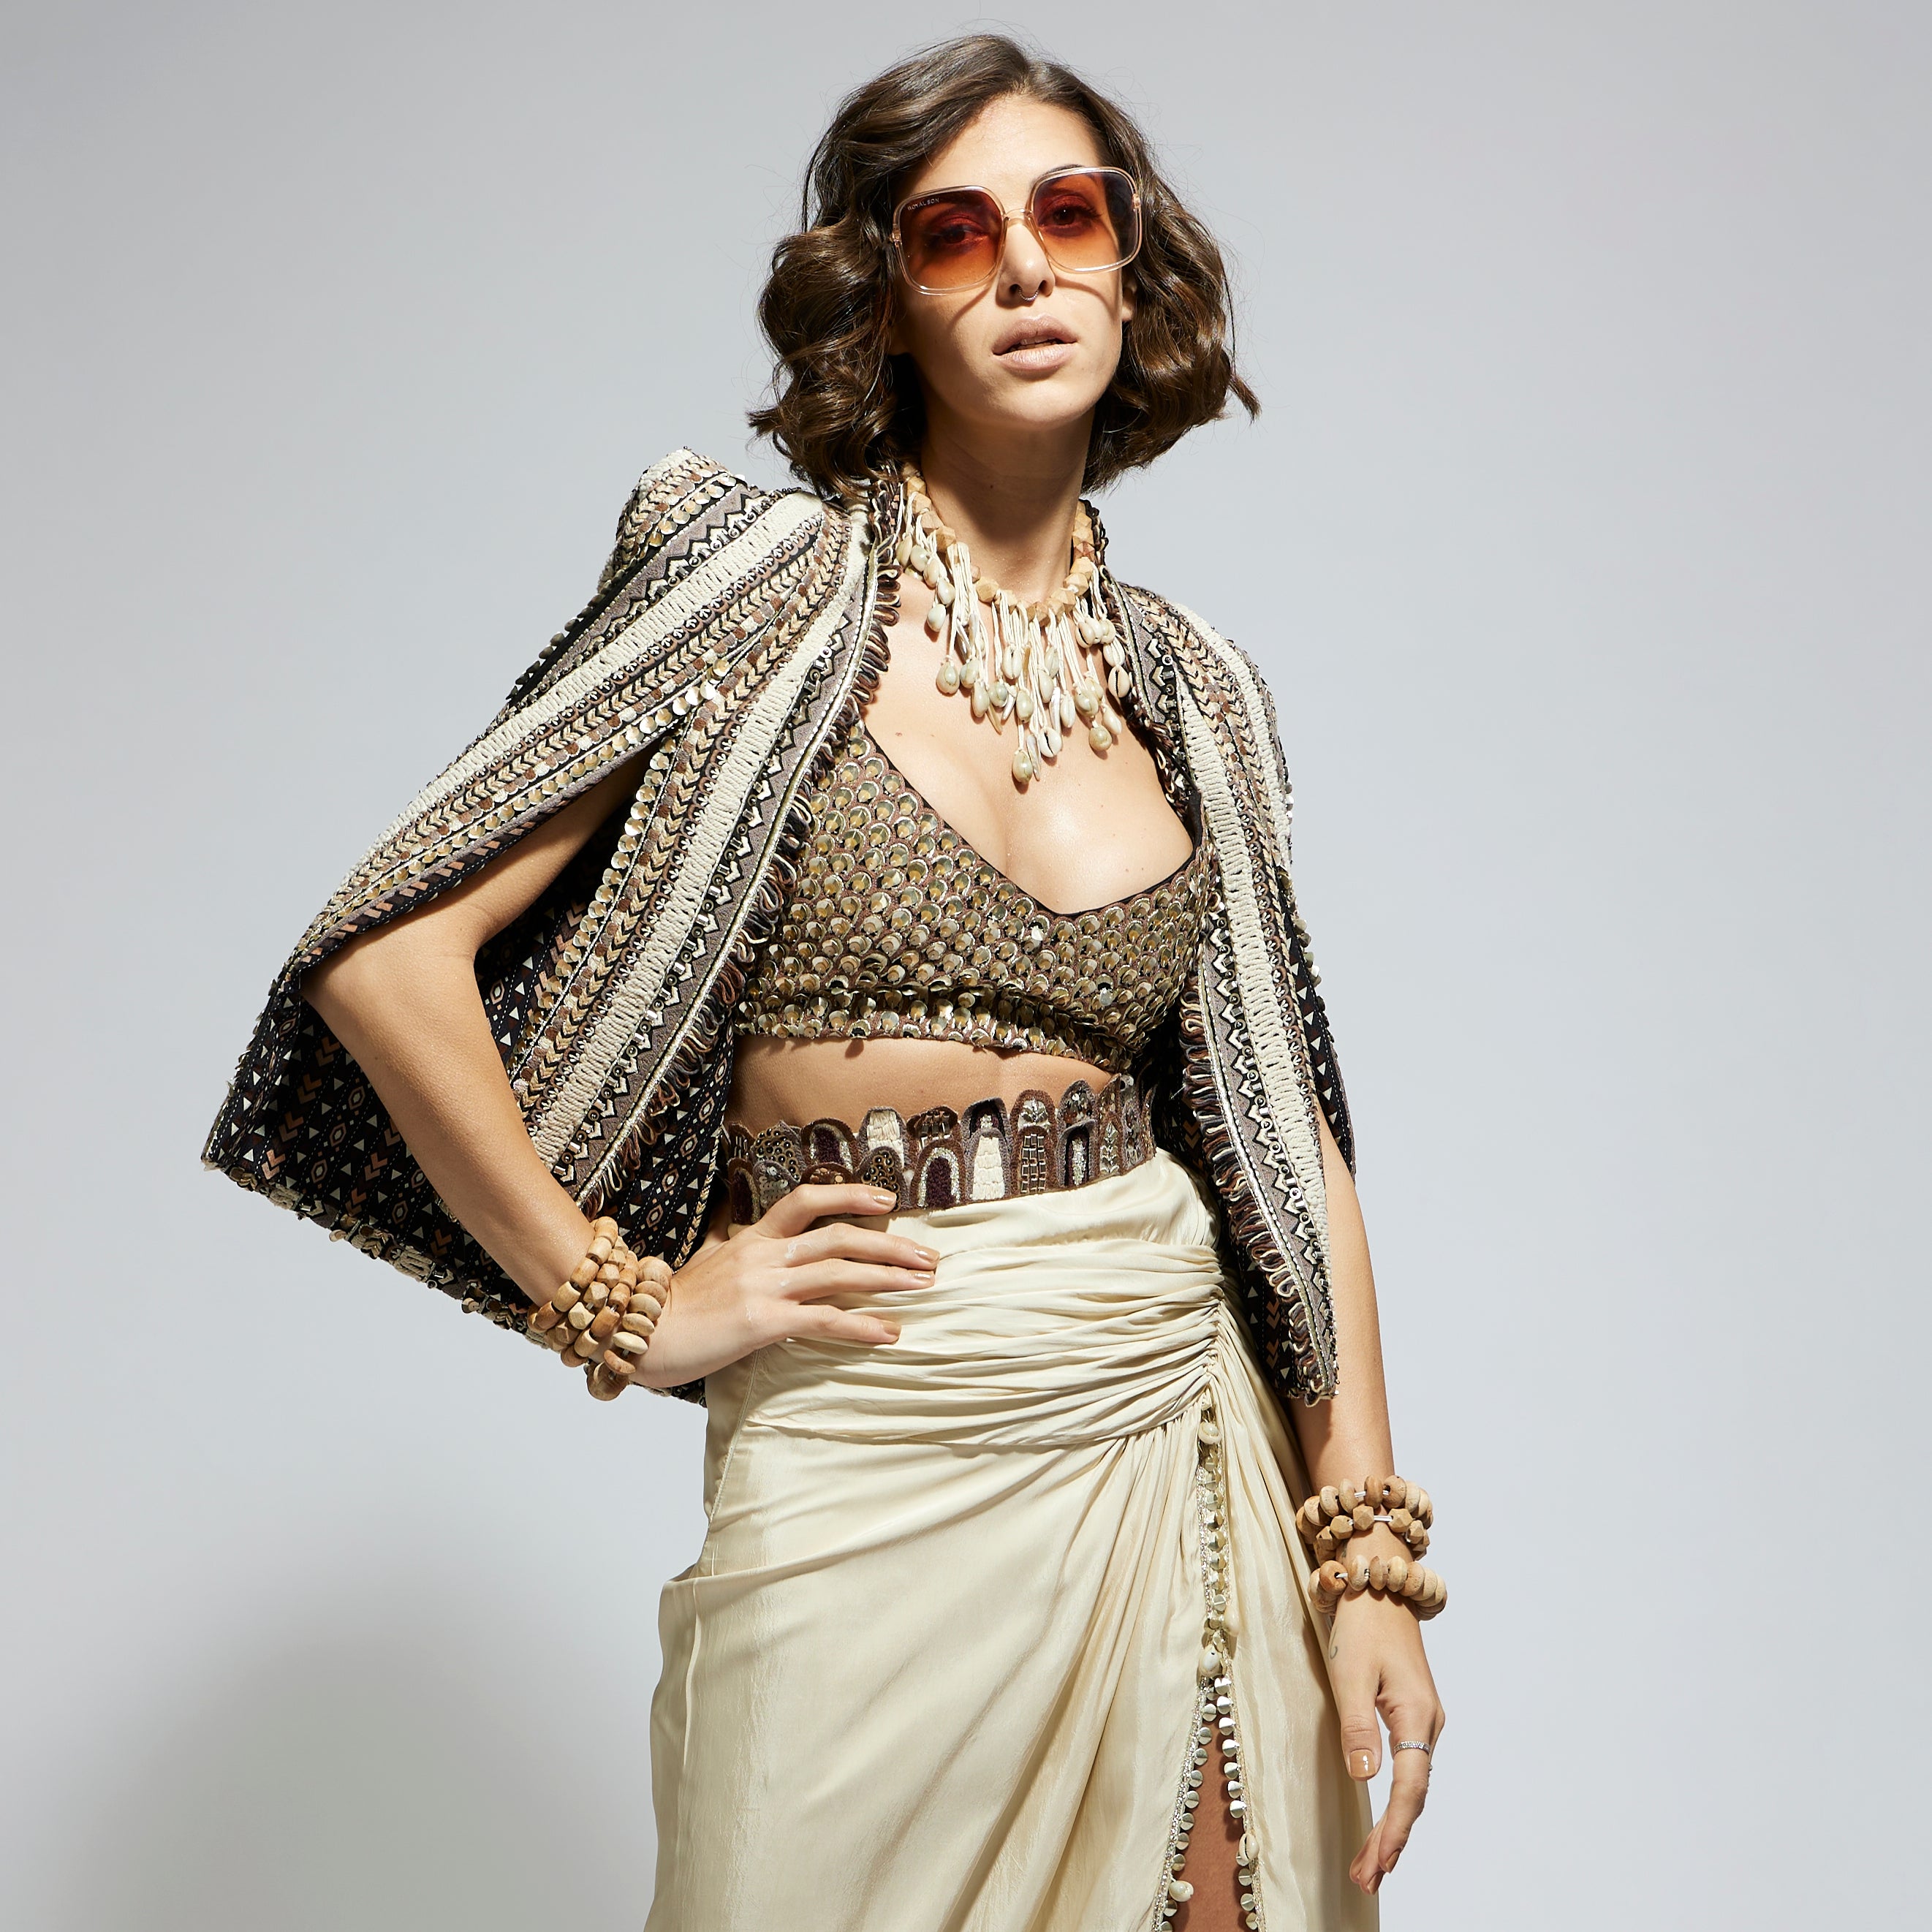 EMBELLISHED & TEXTURED CAPE JACKET PAIRED WITH METALLIC SCALLOP BUSTIER AND IVORY HIGH SLIT SKIRT